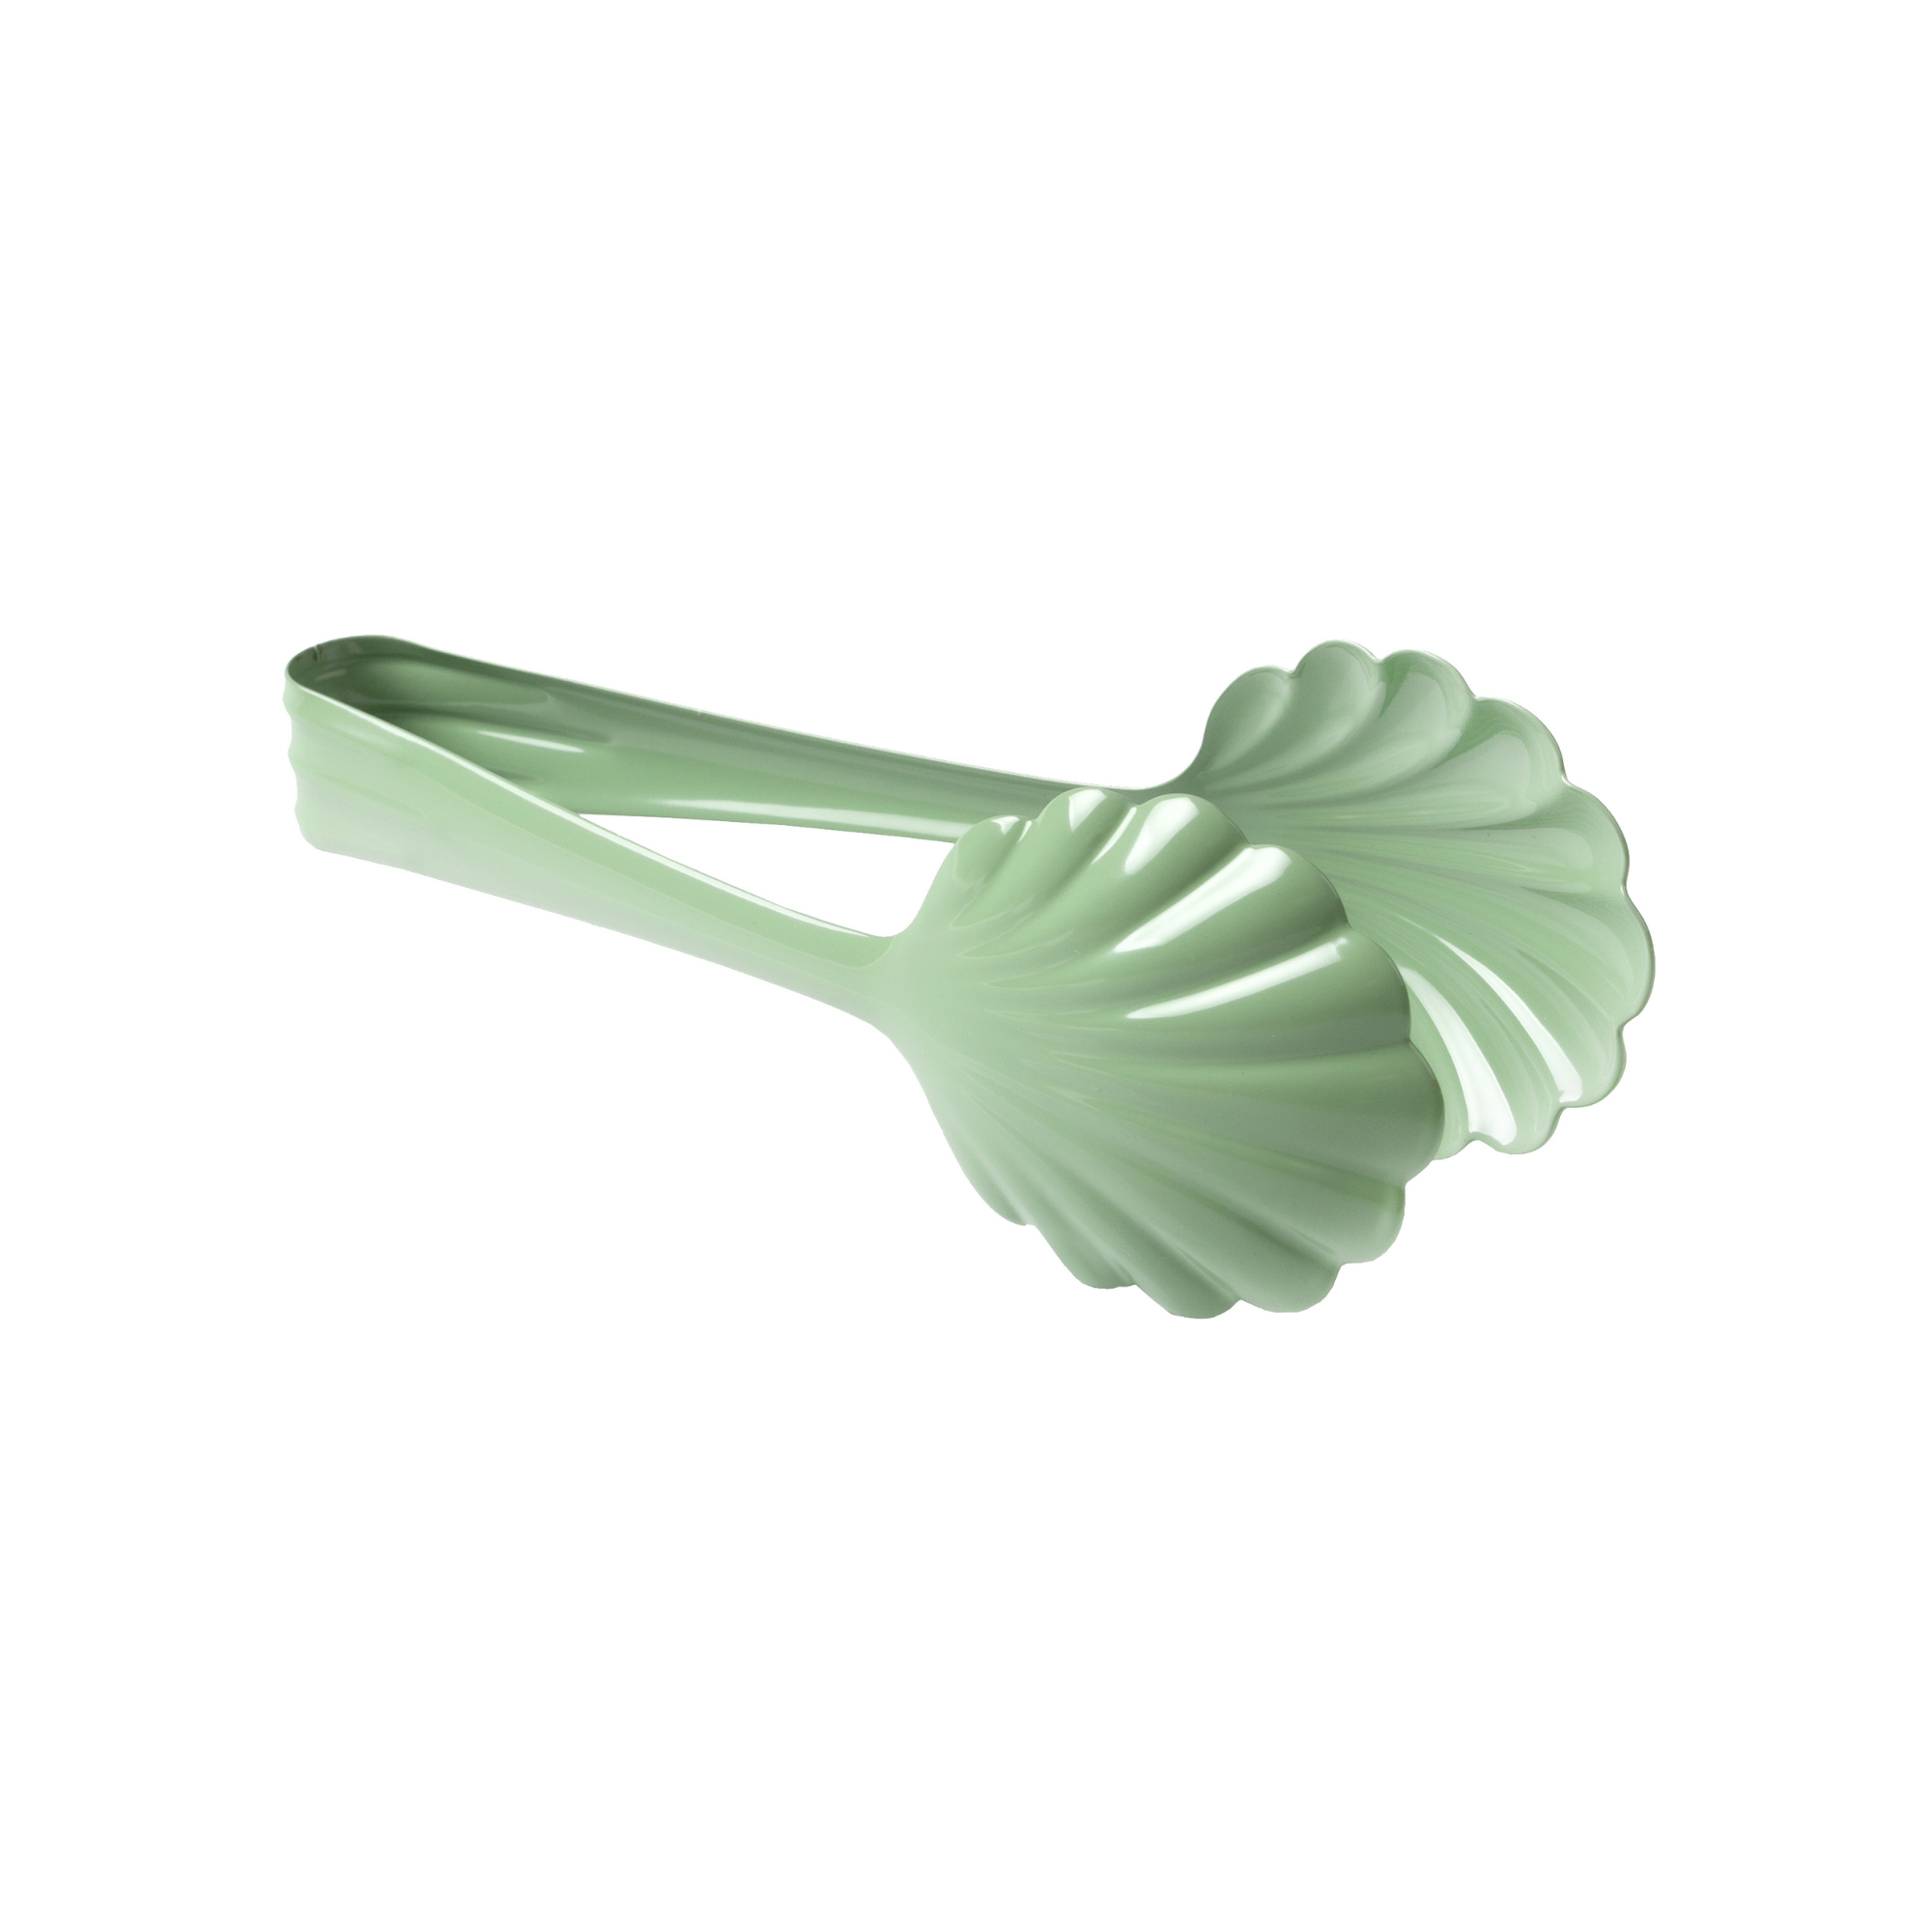 Scalloped Serving Tongs in Stainless Steel